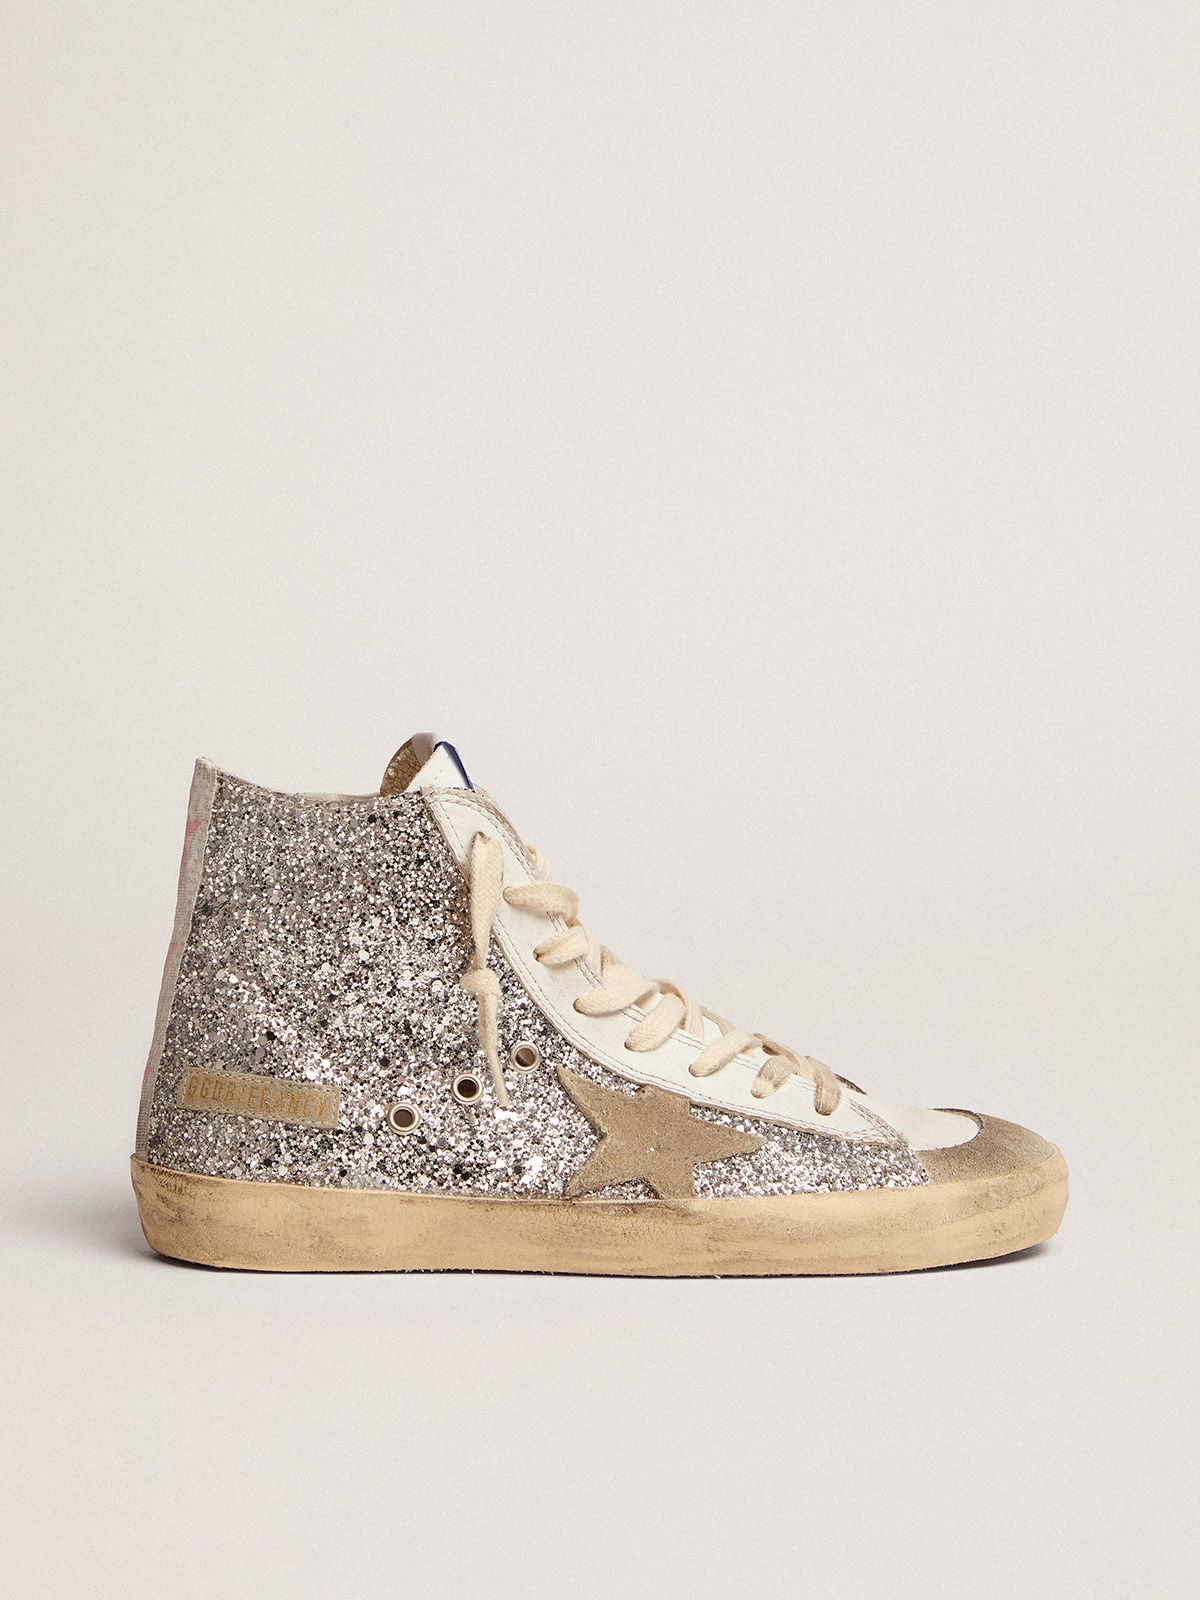 Penstar Francy sneakers with silver glitter upper and ice-gray suede star | 